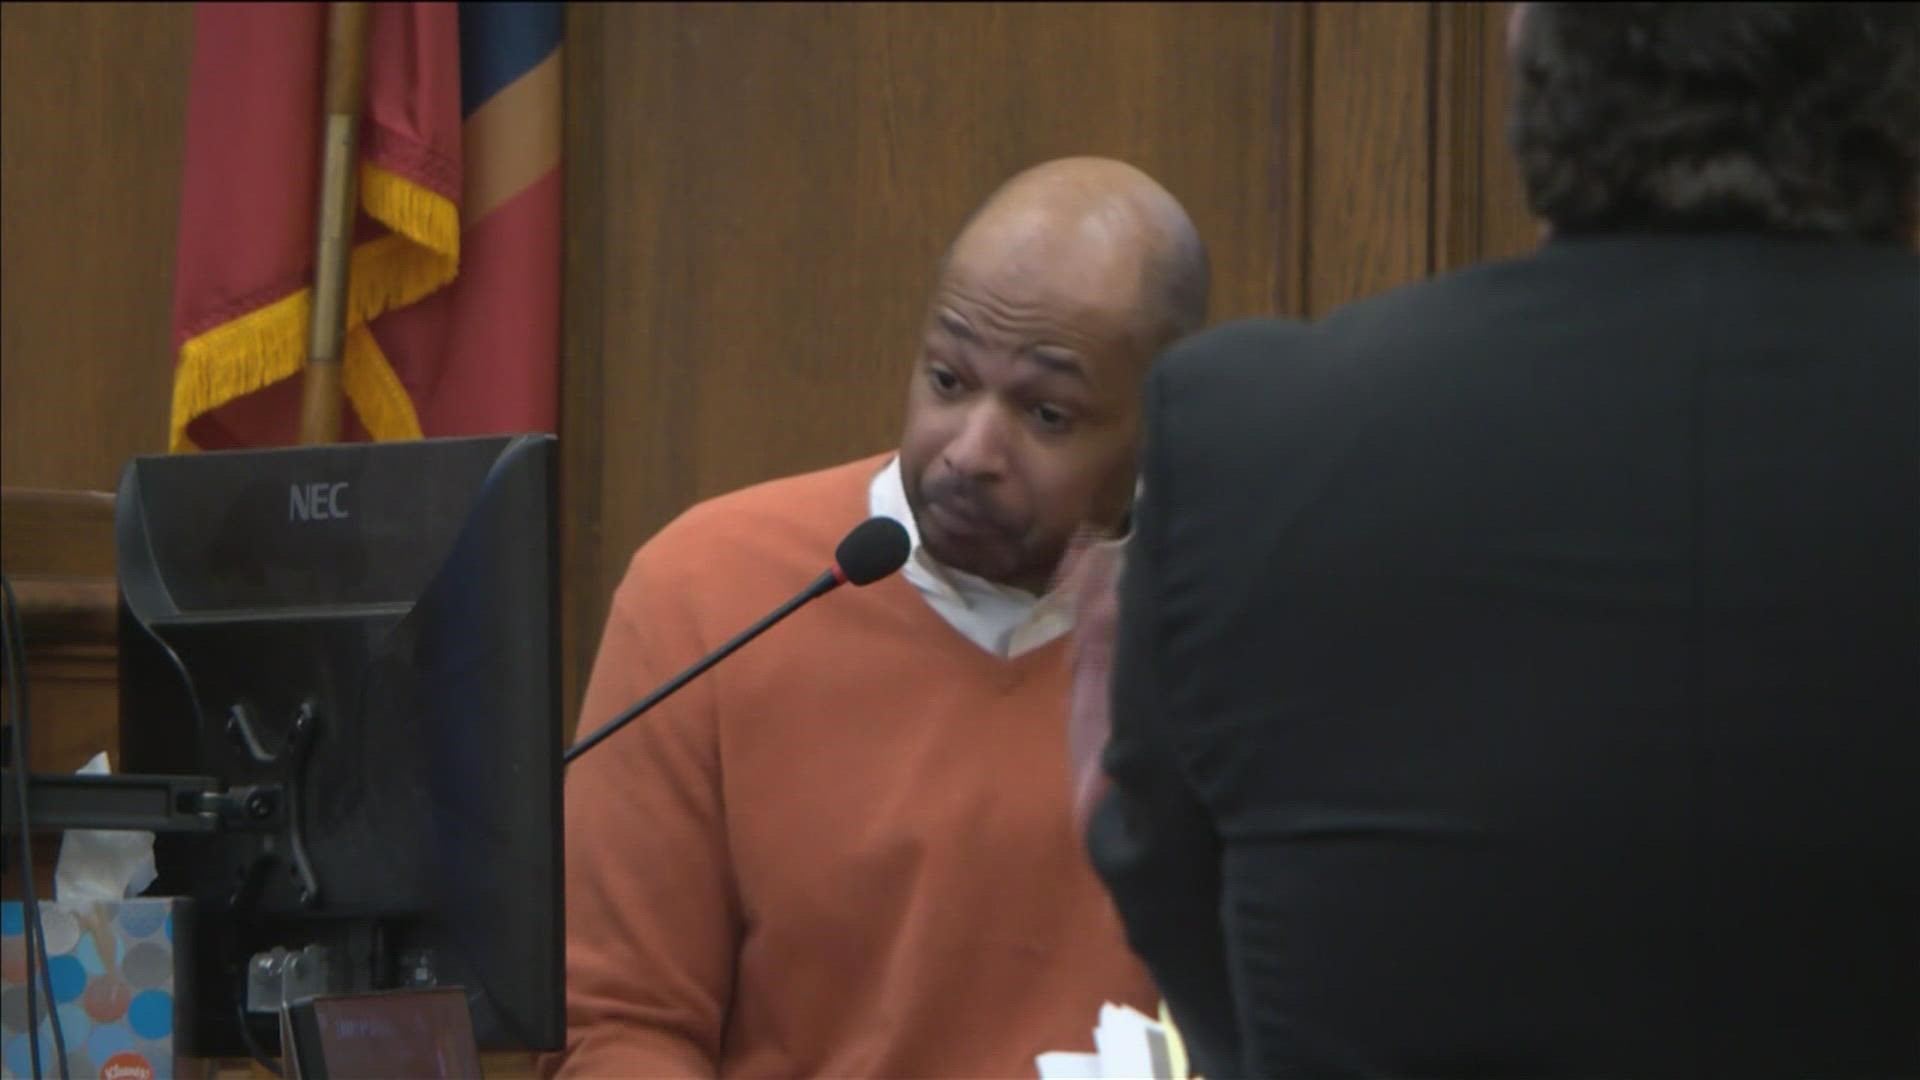 A jury convicted Martez Abram after only 55 minutes of deliberation Thursday, just hours after Abram took the stand in his own defense.